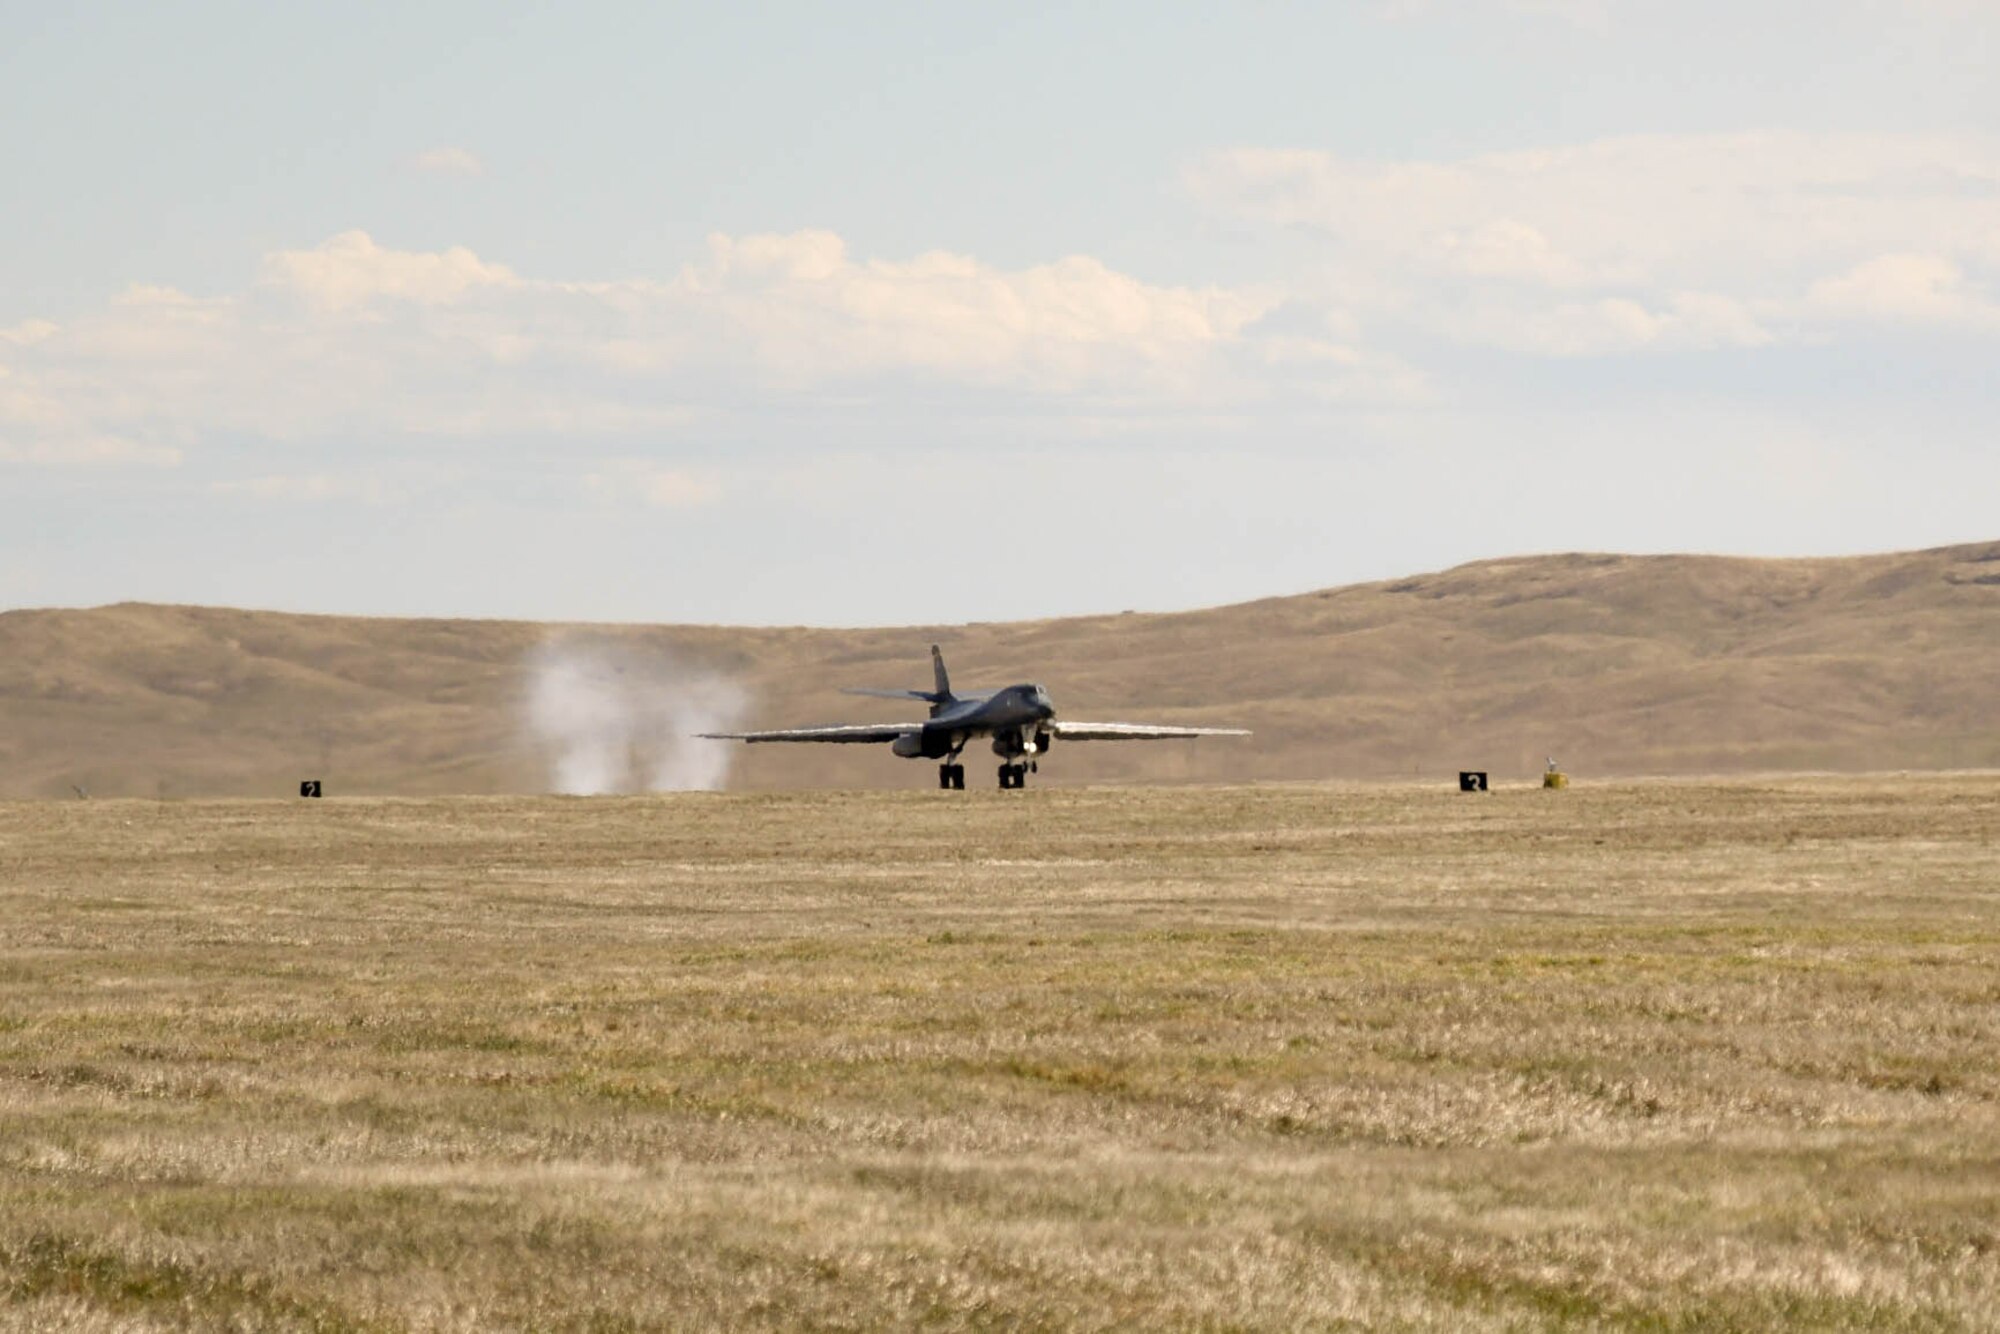 A B-1B Lancer touches down at Ellsworth Air Force Base, S.D., after completing a nearly 29-hour round-trip sortie to the Pacific theater of operations April 22, 2020.